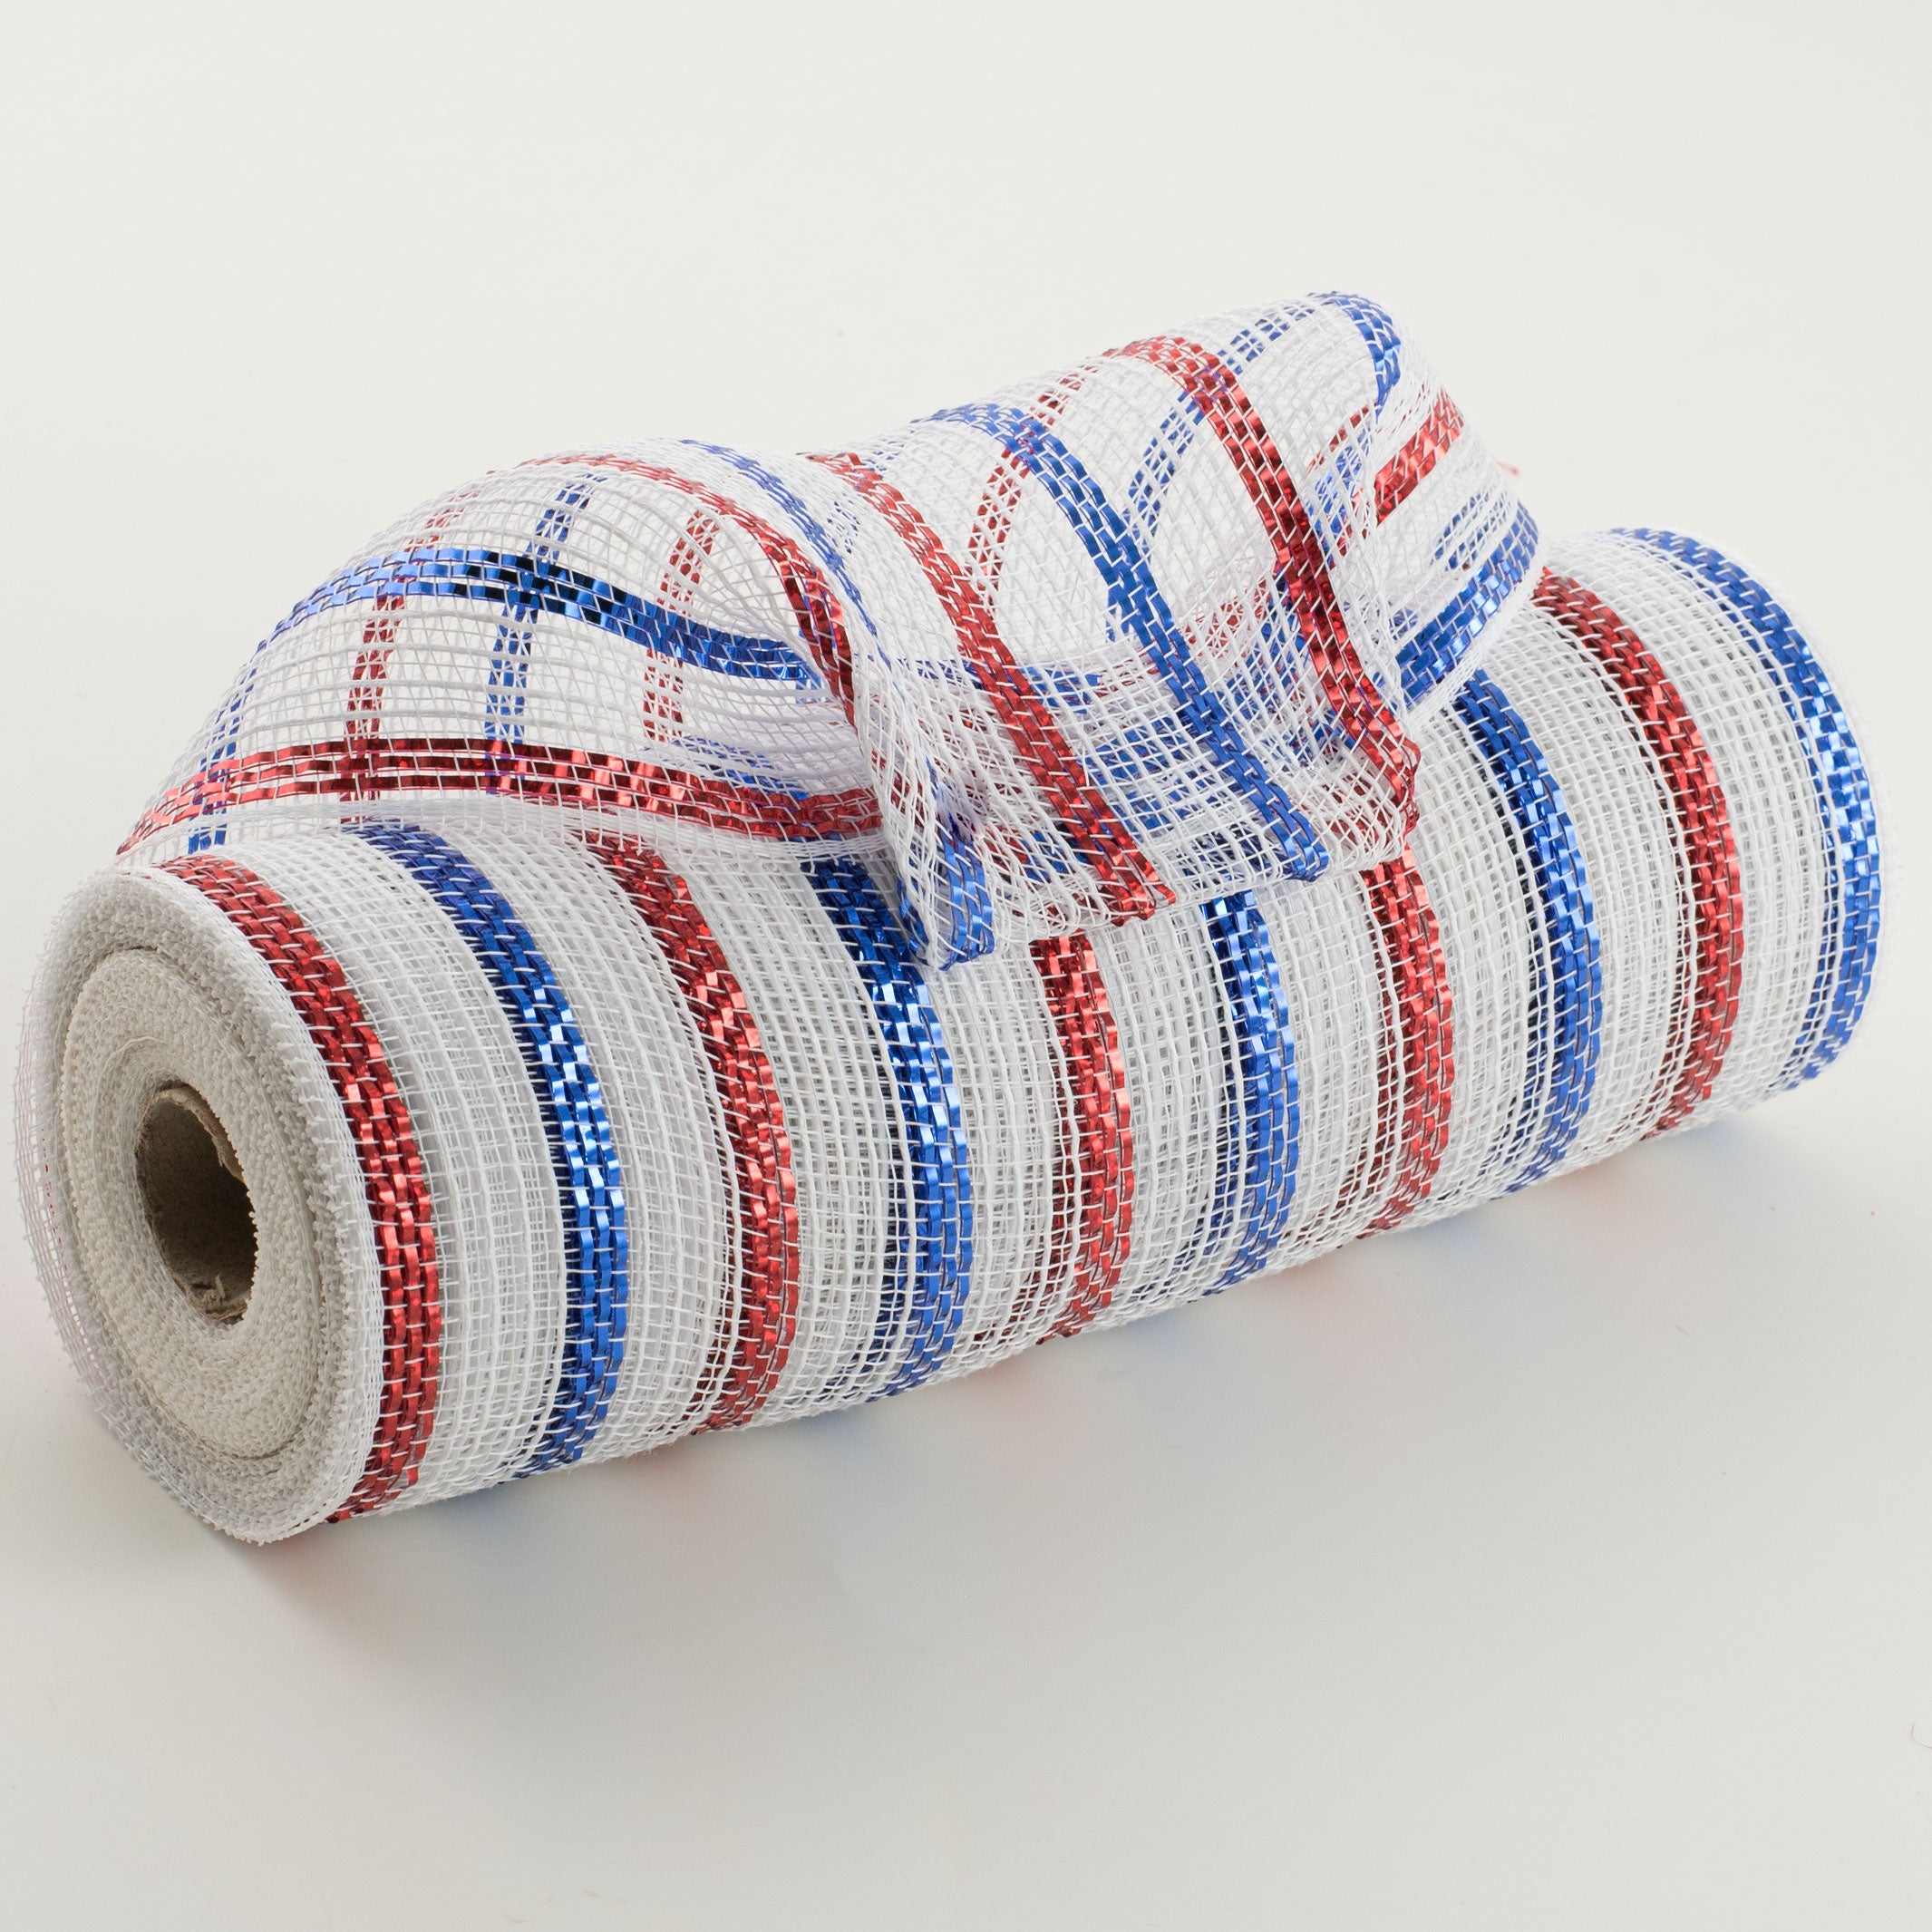 10" Cotton Poly Deco Mesh: Red/White/Blue (10 Yards)